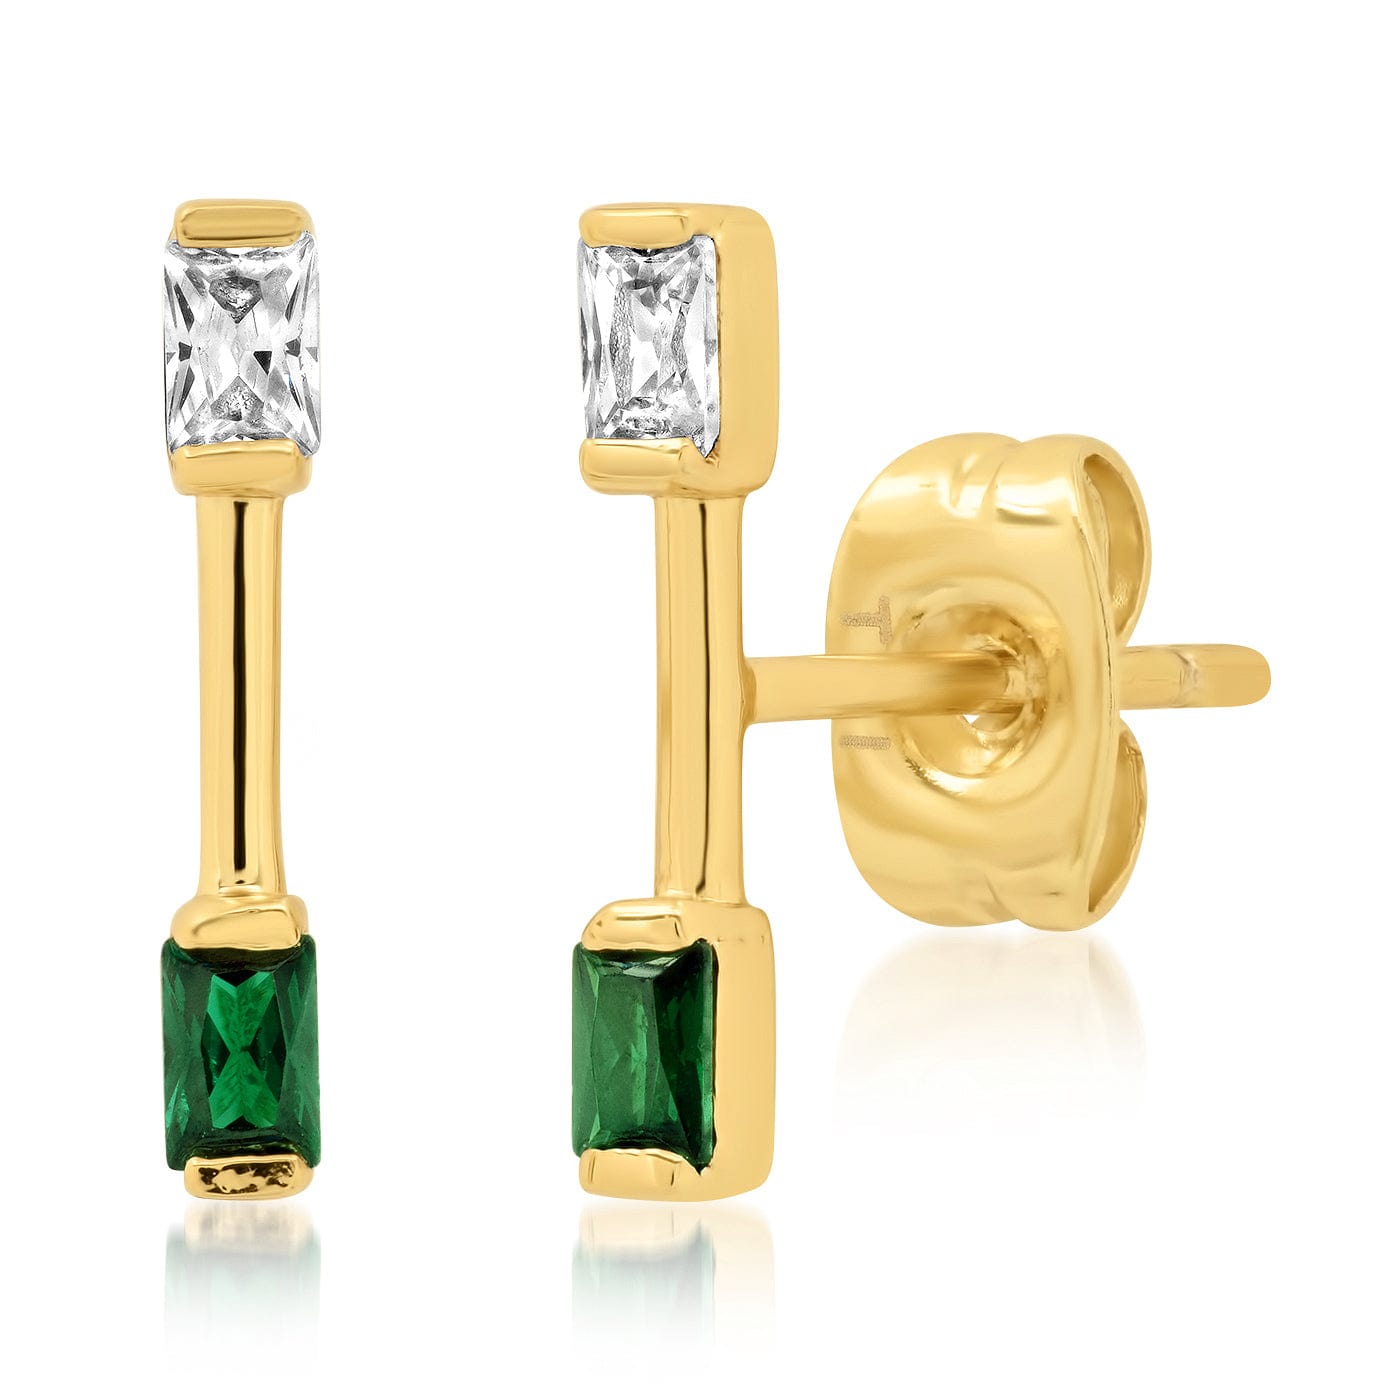 TAI JEWELRY Earrings Gold Bar Stud With CZ And Emerald Green Stone Accents